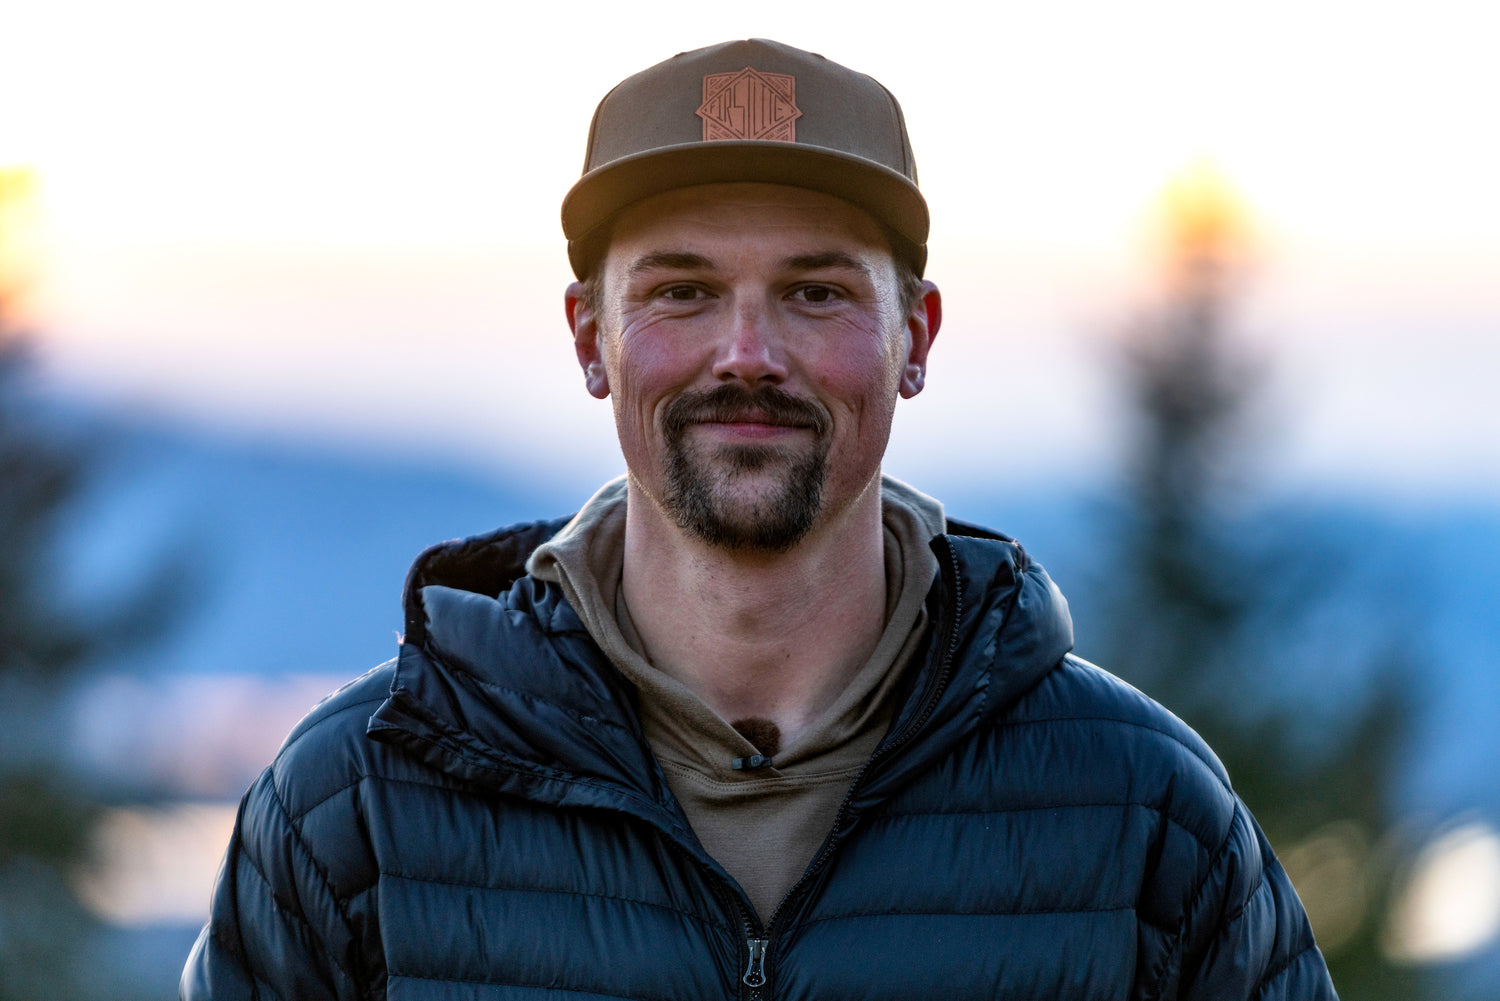 Every Little Thing: A Conversation with MeatEater’s Mark Kenyon